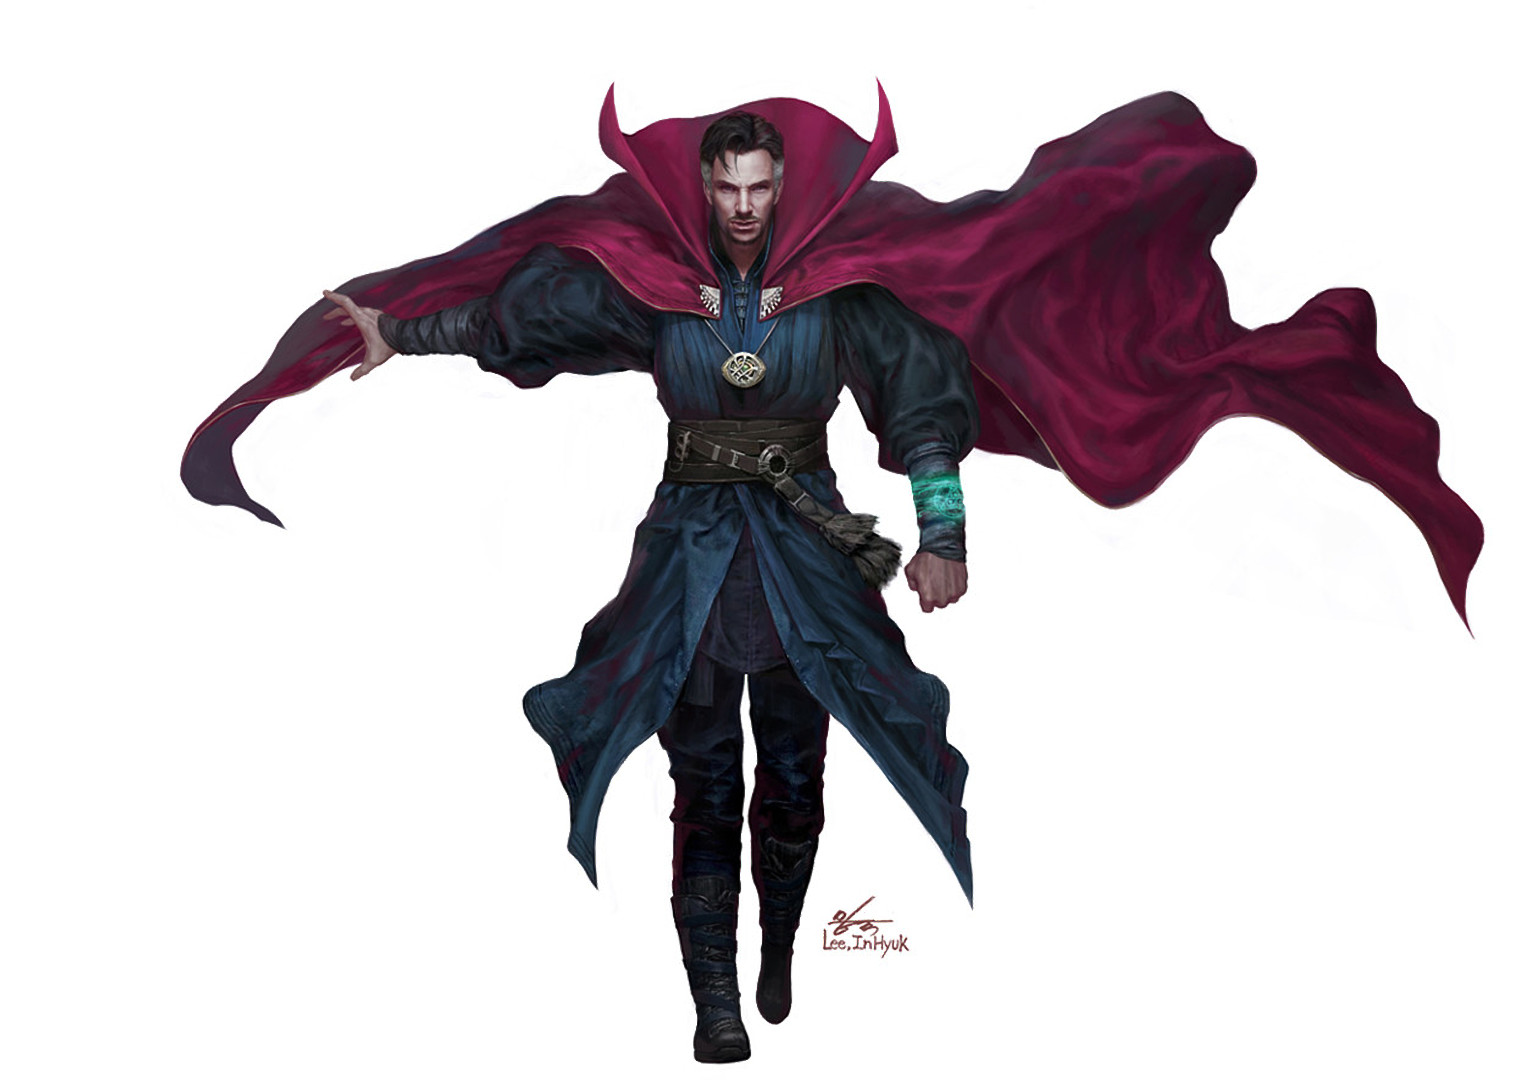 General 1525x1080 InHyuk Lee drawing Marvel Cinematic Universe Doctor Strange men wizard cape robes jewelry necklace walking simple background white background frontal view movies